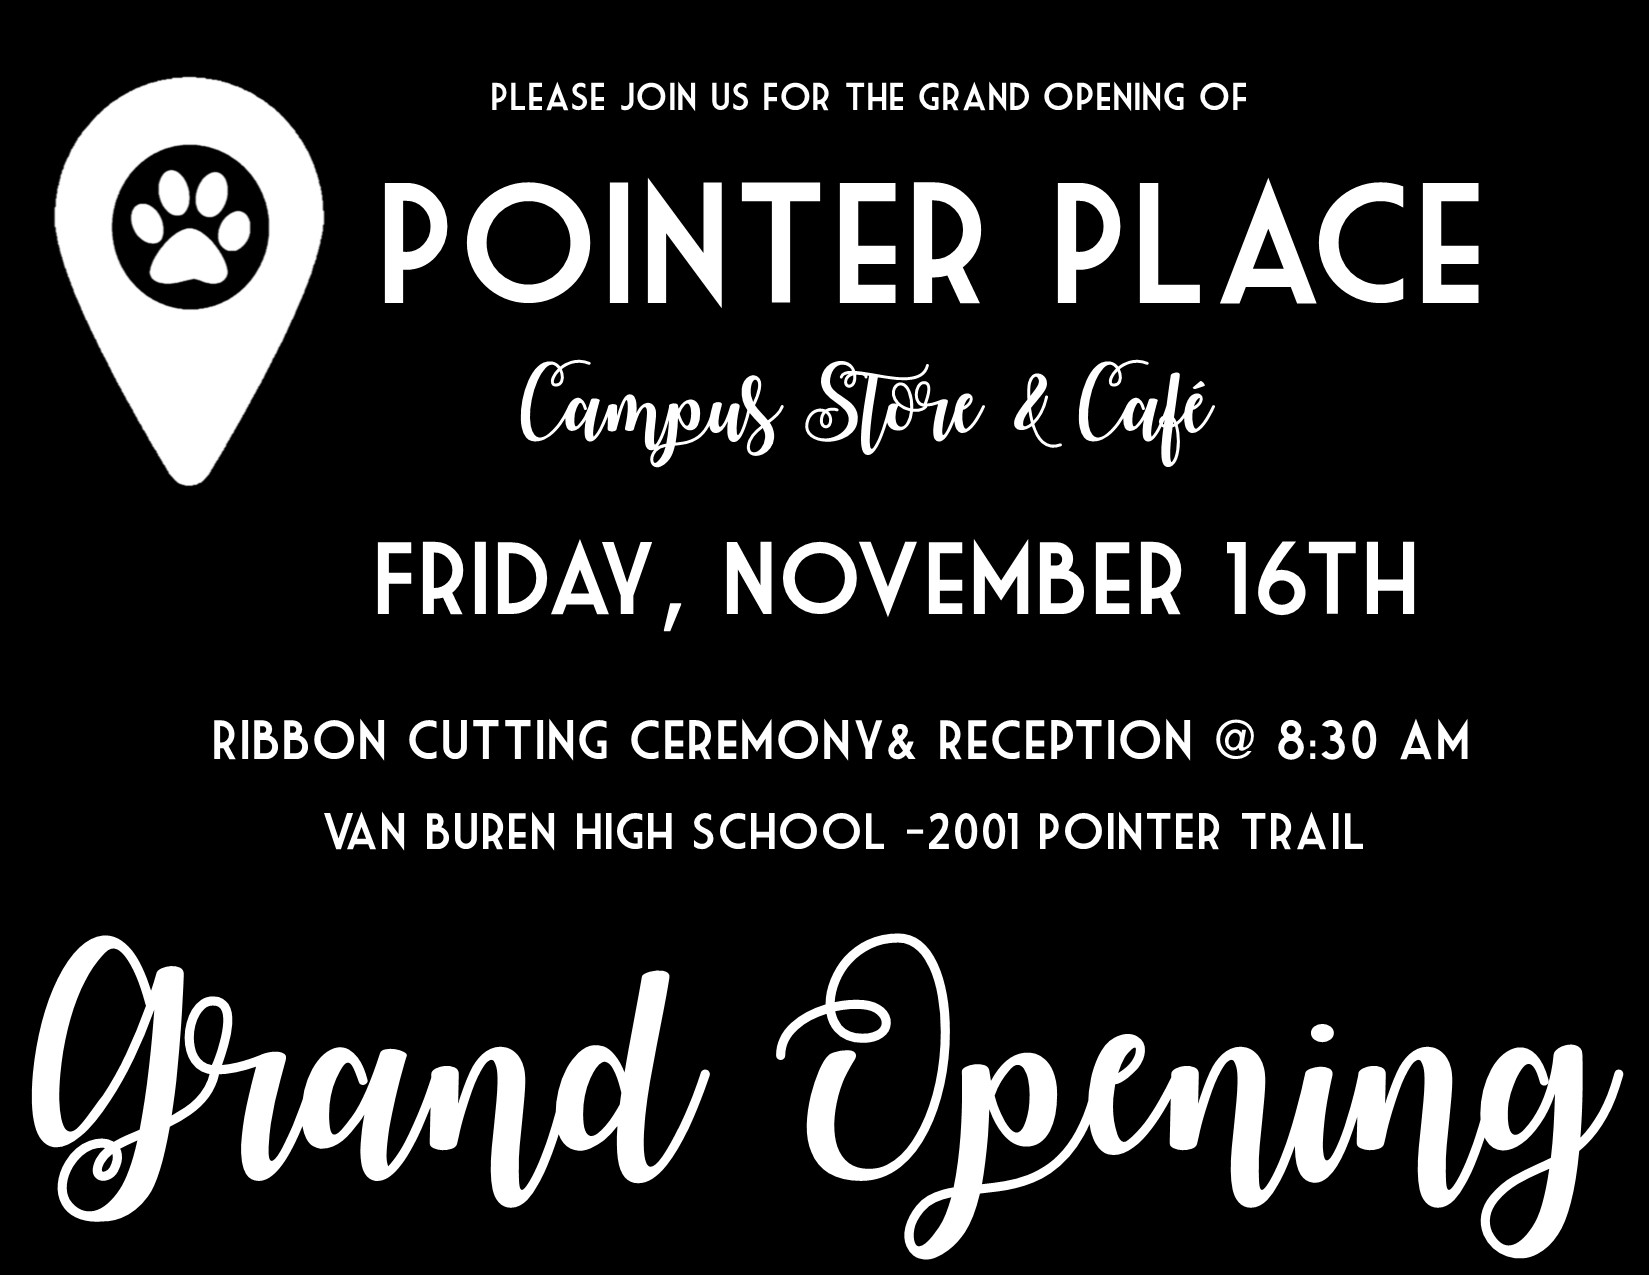 Pointer Place Grand Opening set for November 16